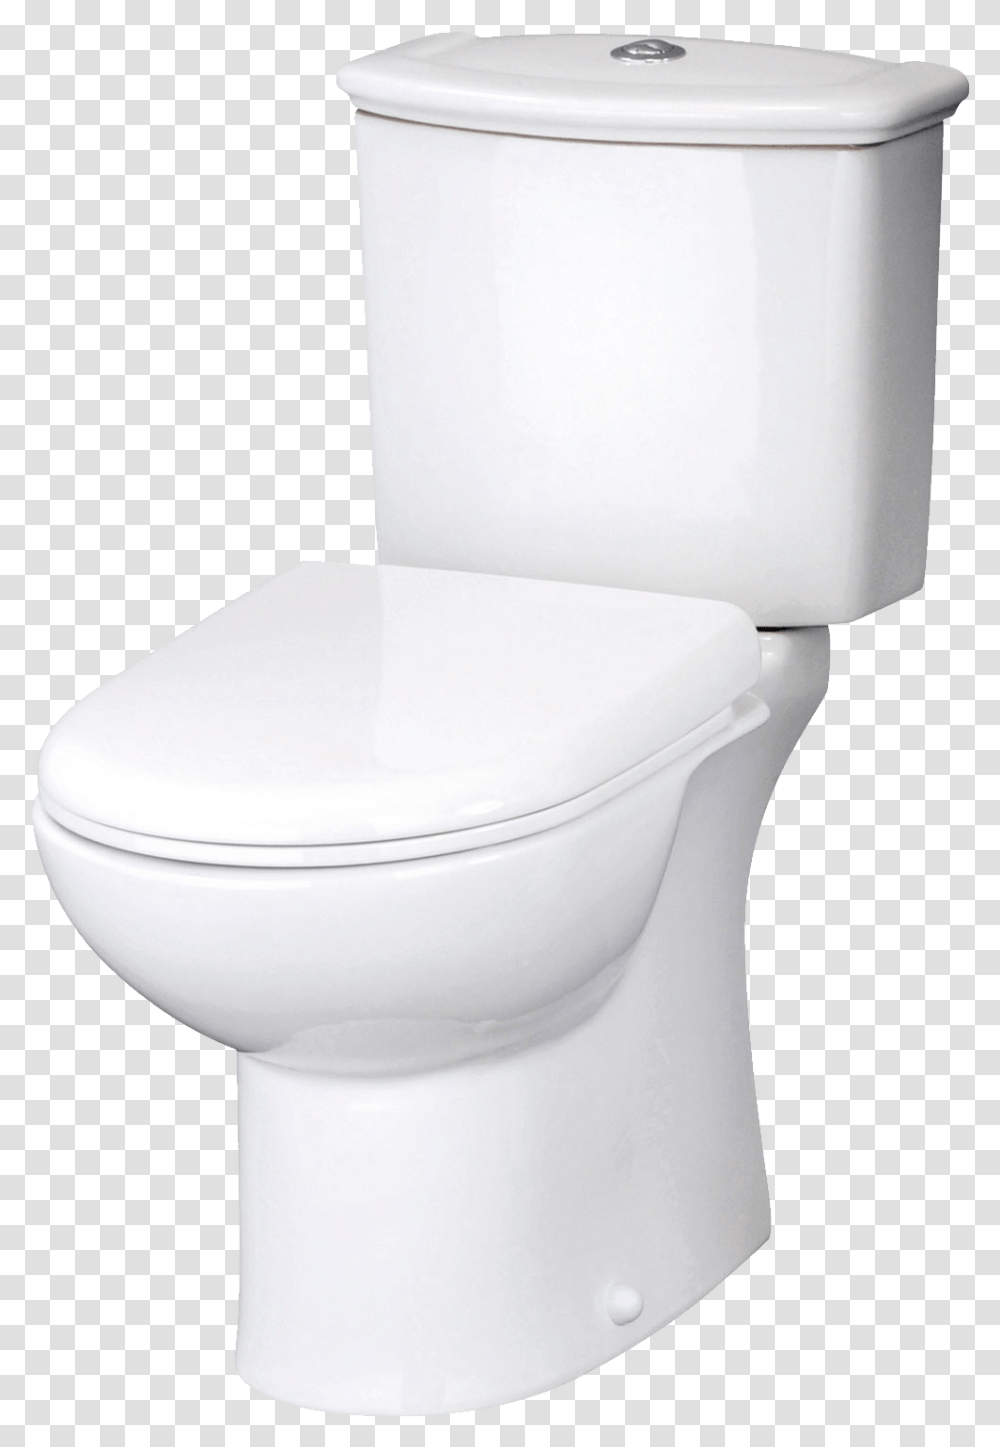 Toilet Black Background Image With Toilet With Black Background, Room, Indoors, Bathroom, Potty Transparent Png